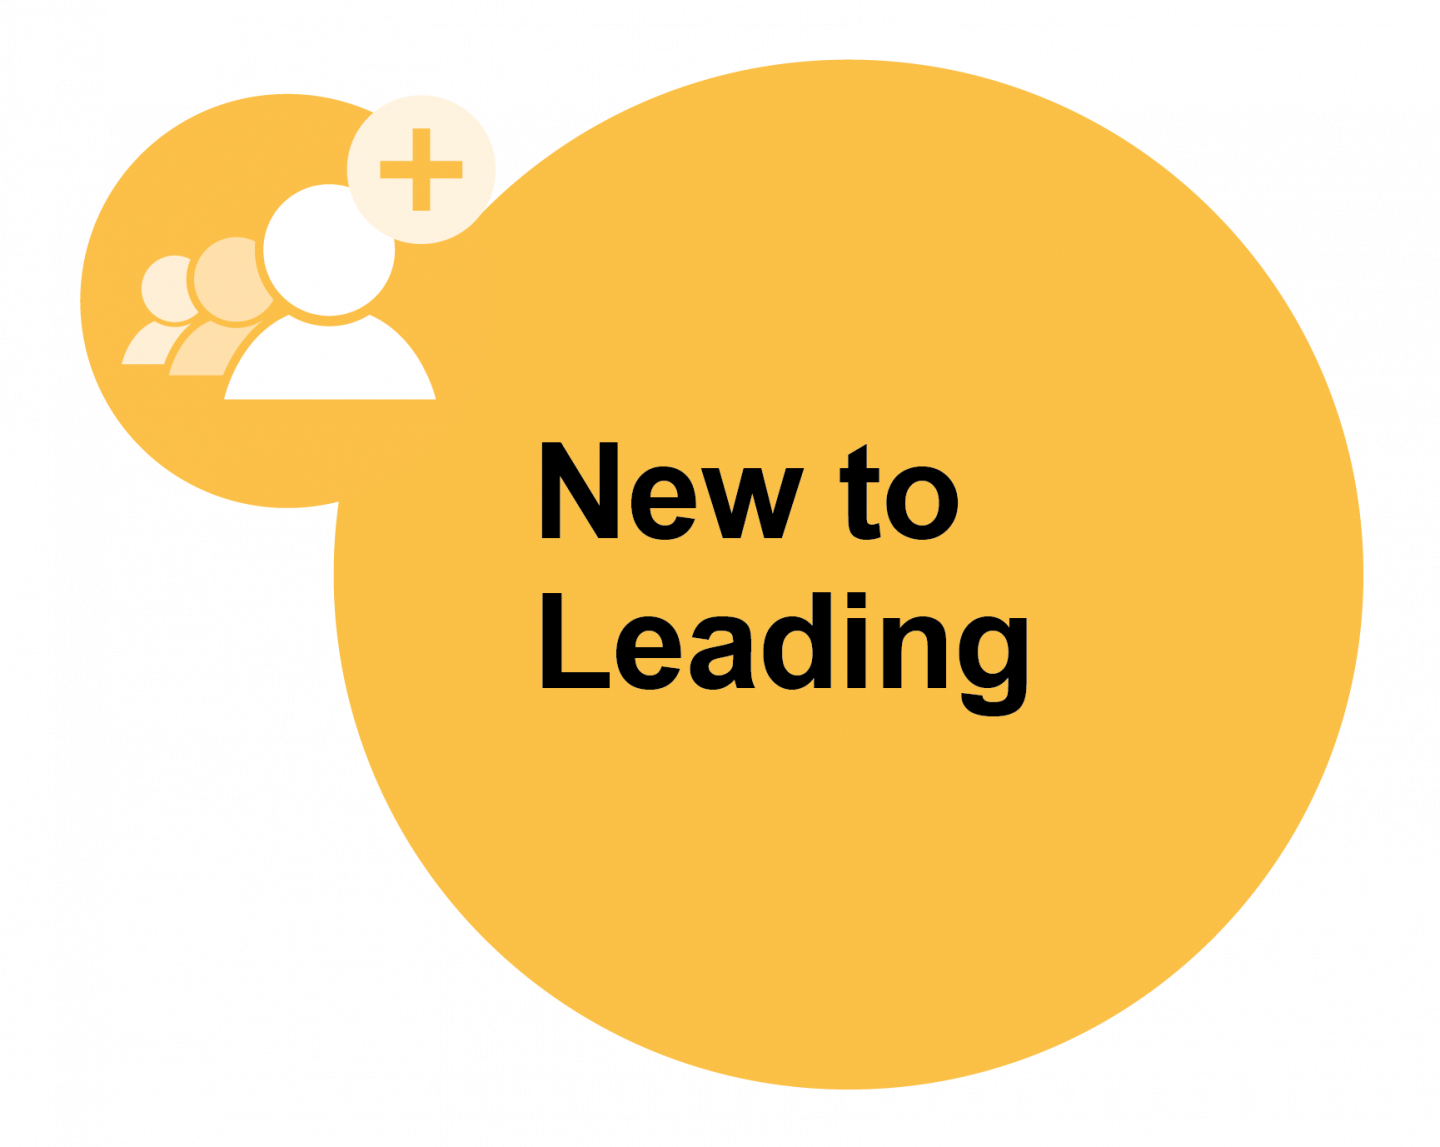 New to leading